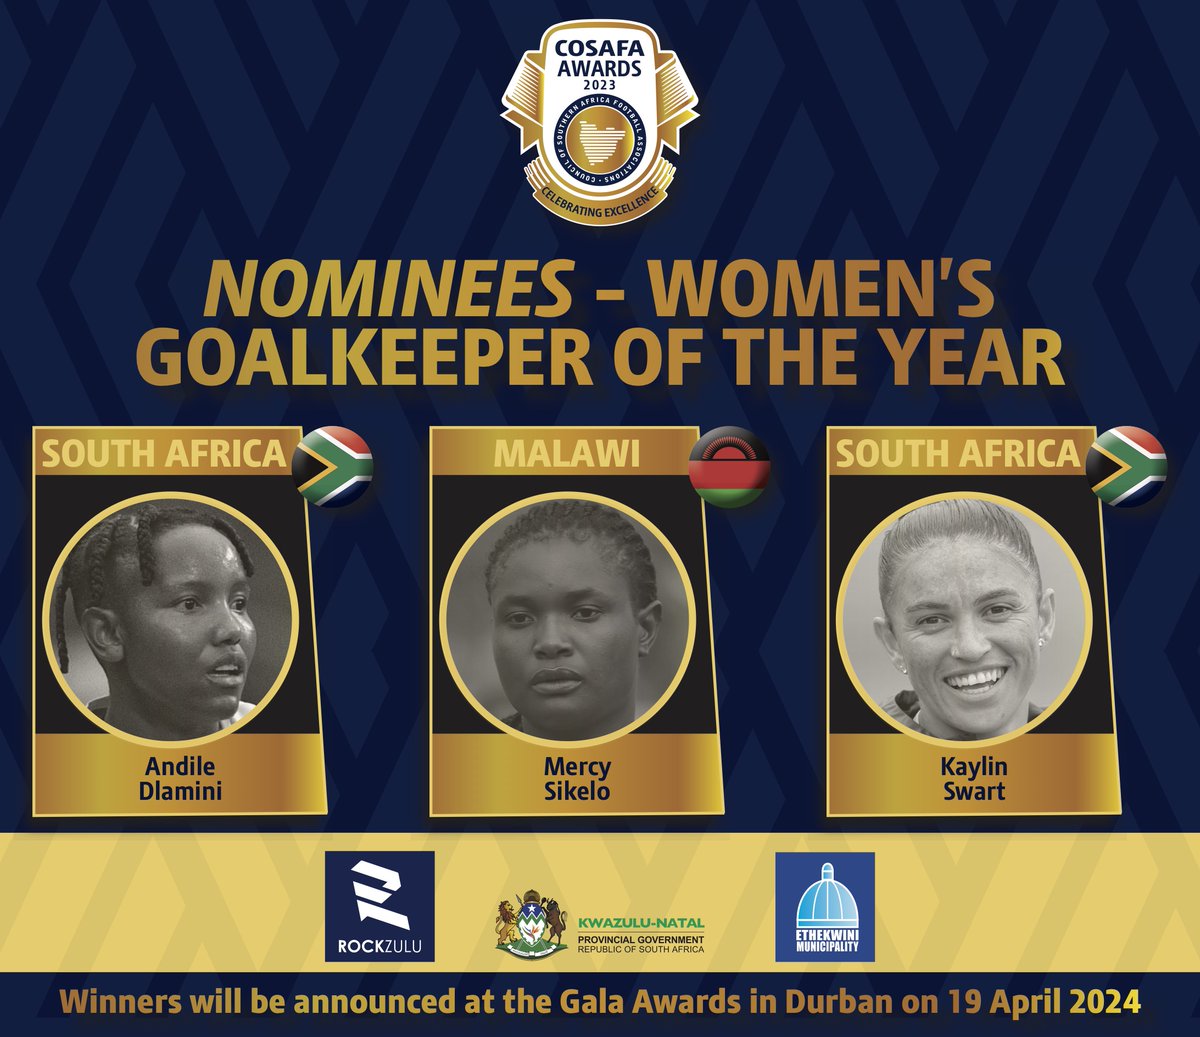 The nominees for the category of the Women’s Goalkeeper of the Year at the inaugural 2023 #COSAFAAwards have been unveiled. The winner will be announced at a gala awards ceremony in Durban on April 19. Read more: tinyurl.com/2332jtzy